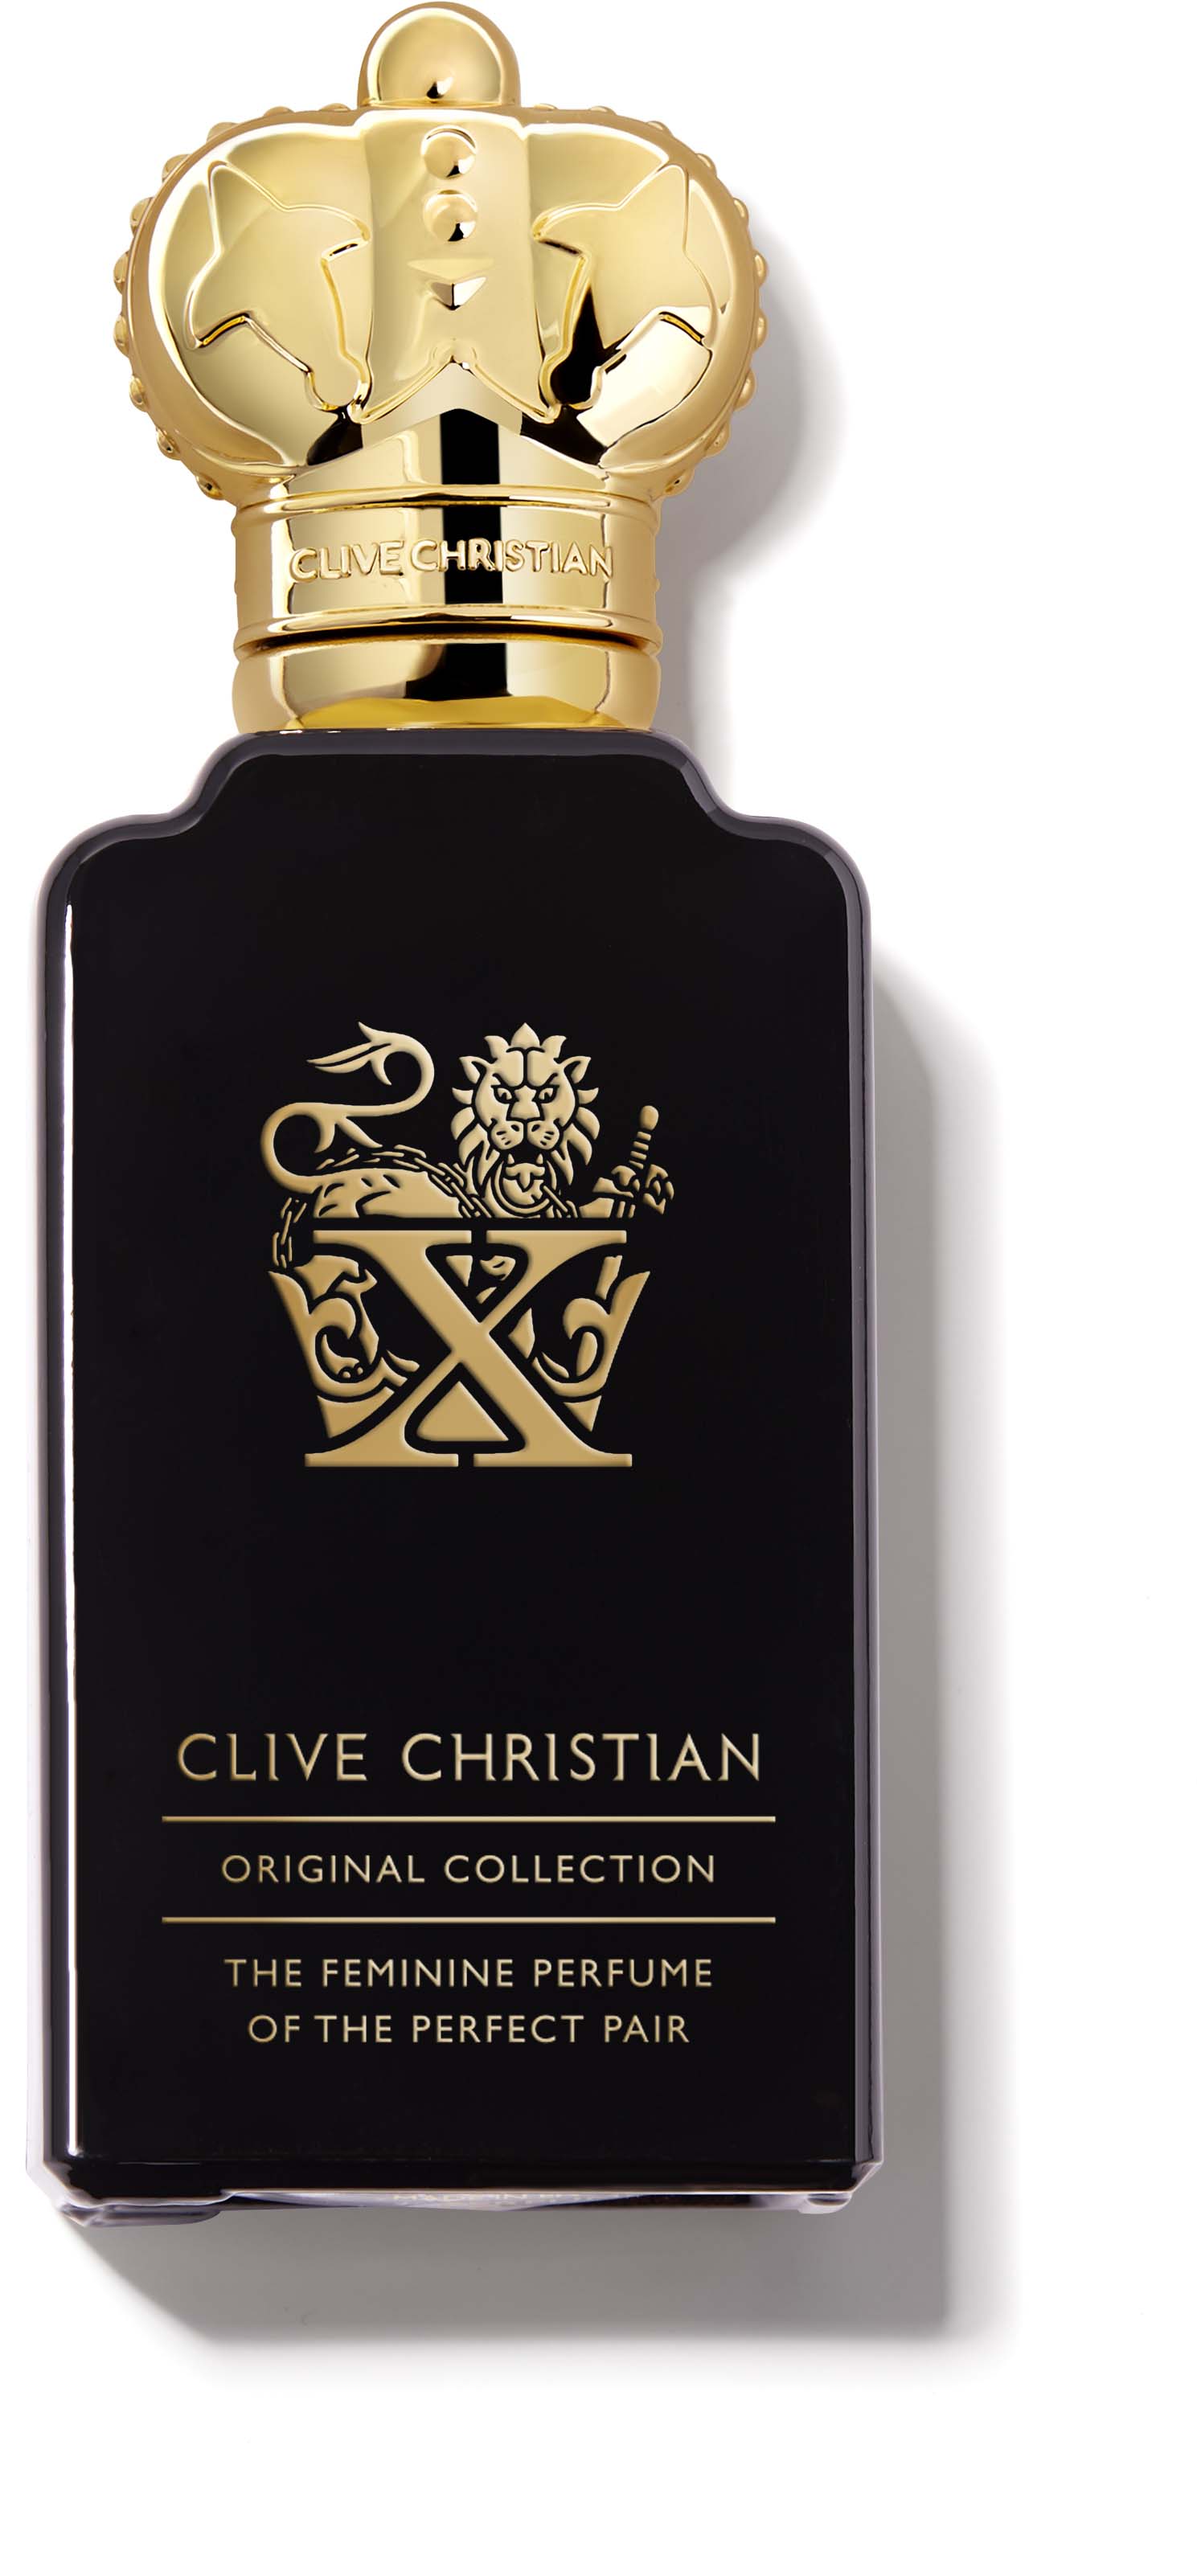 clive christian original collection - x the feminine perfume of the perfect pair